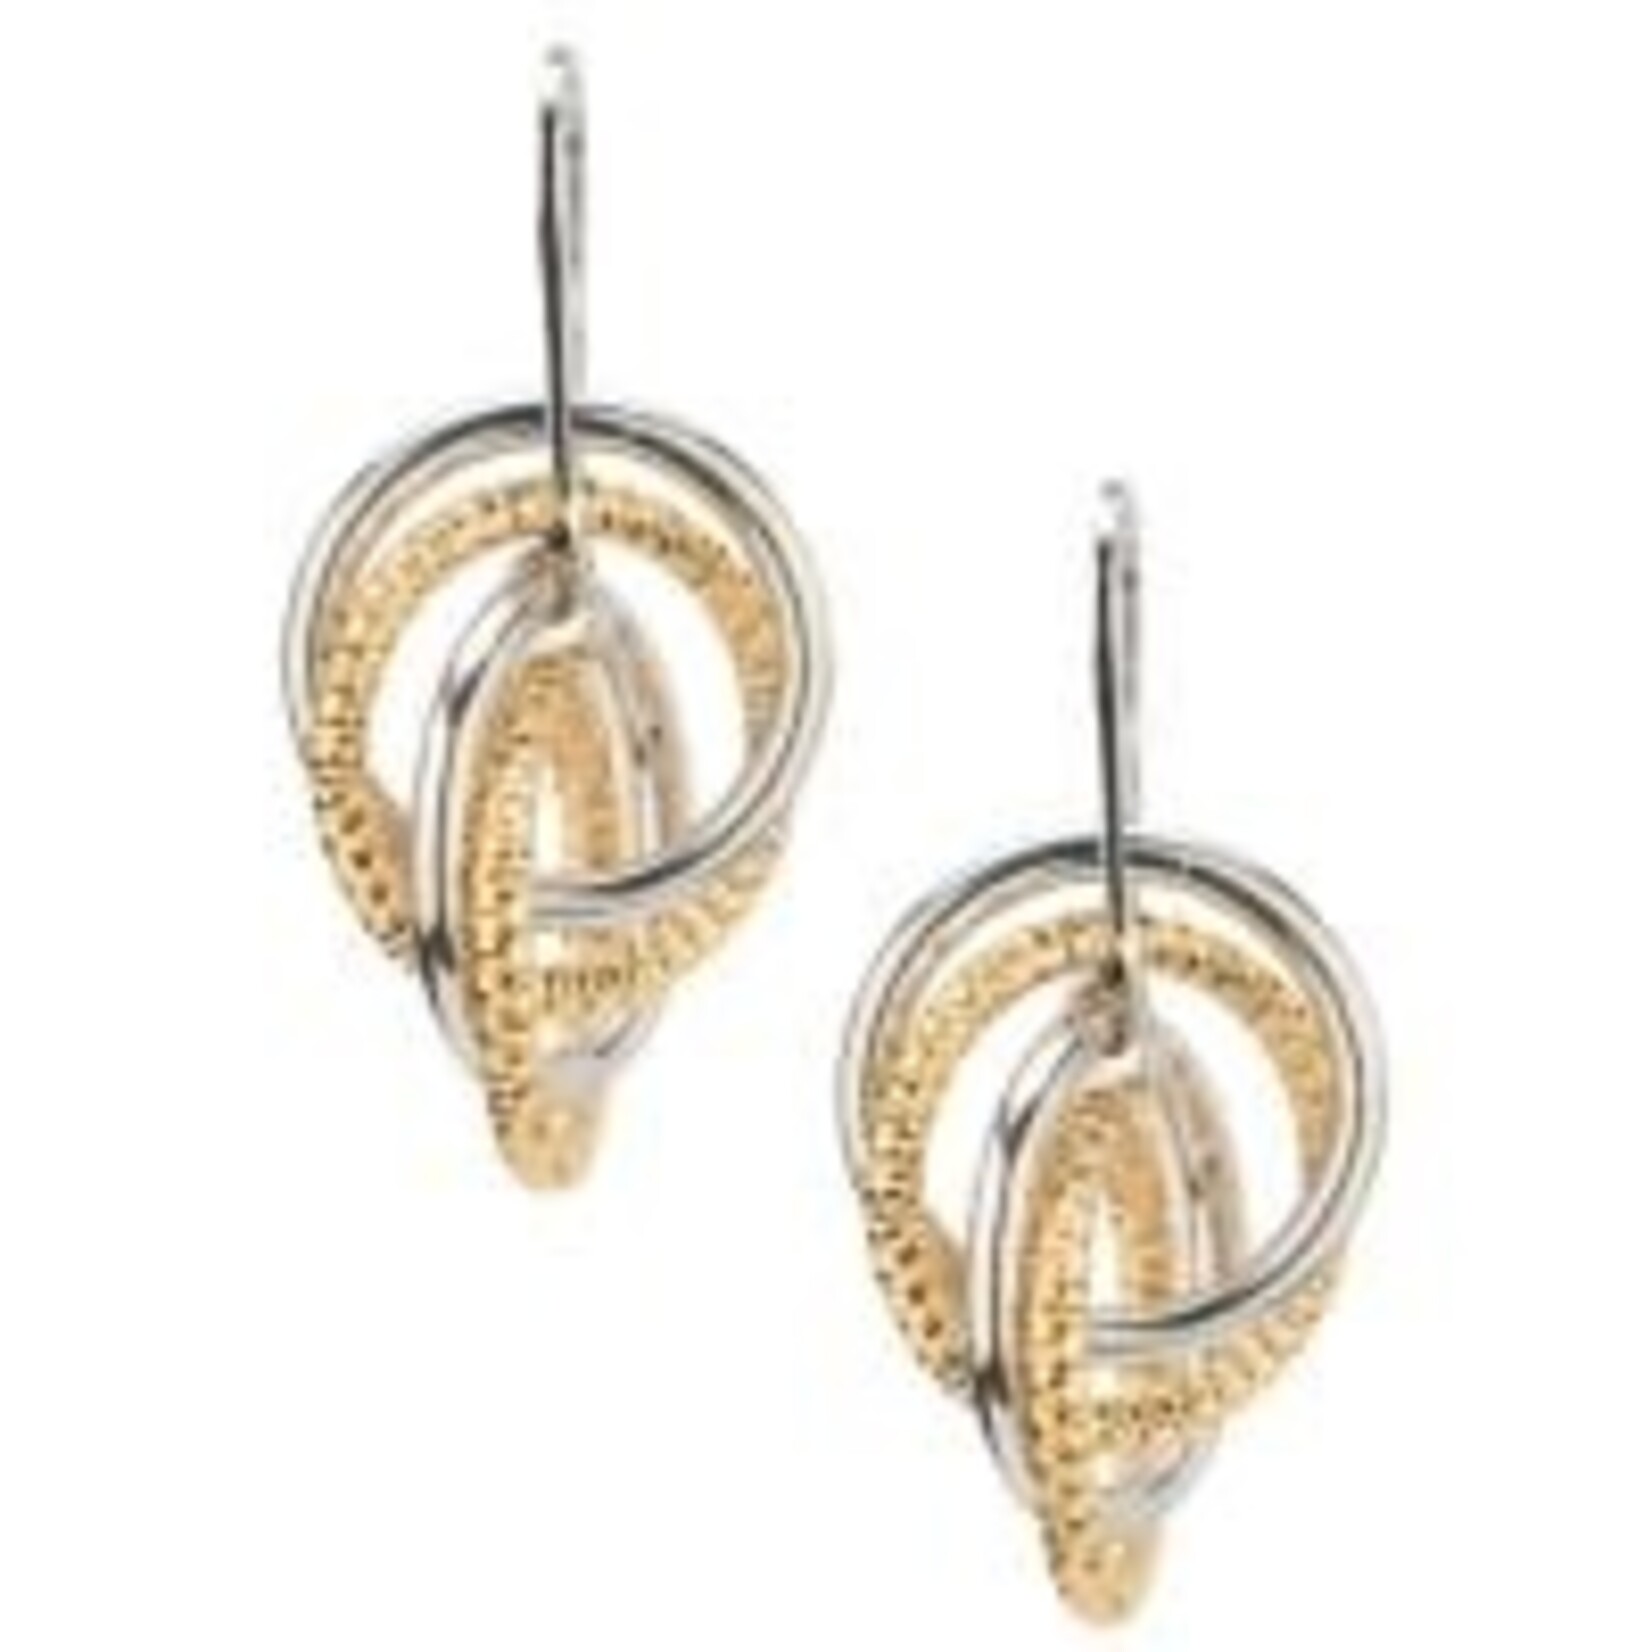 Frederic Duclos SS/ Yellow Gold Plated Infinity Twist Earrings